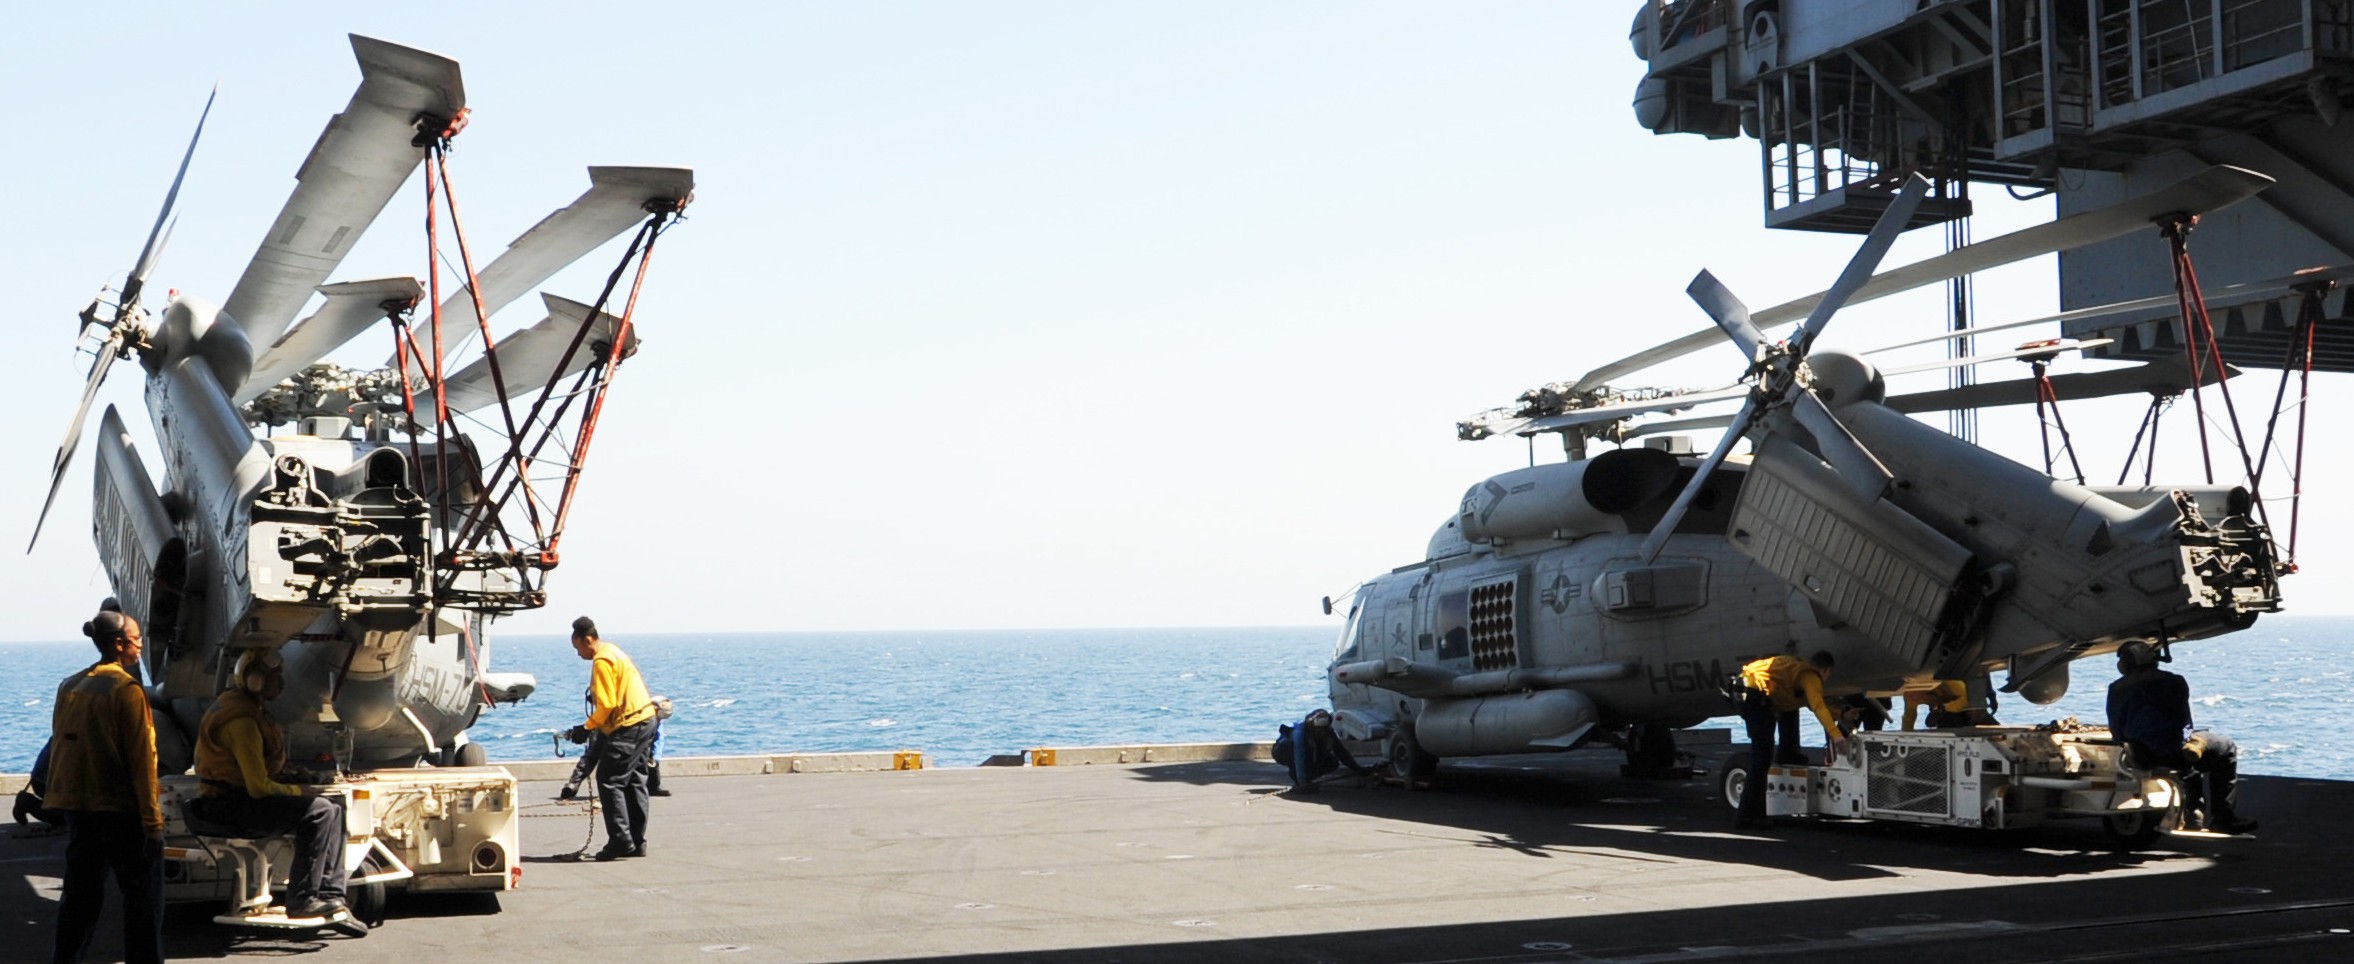 hsm-70 spartans helicopter maritime strike squadron mh-60r seahawk 2014 97